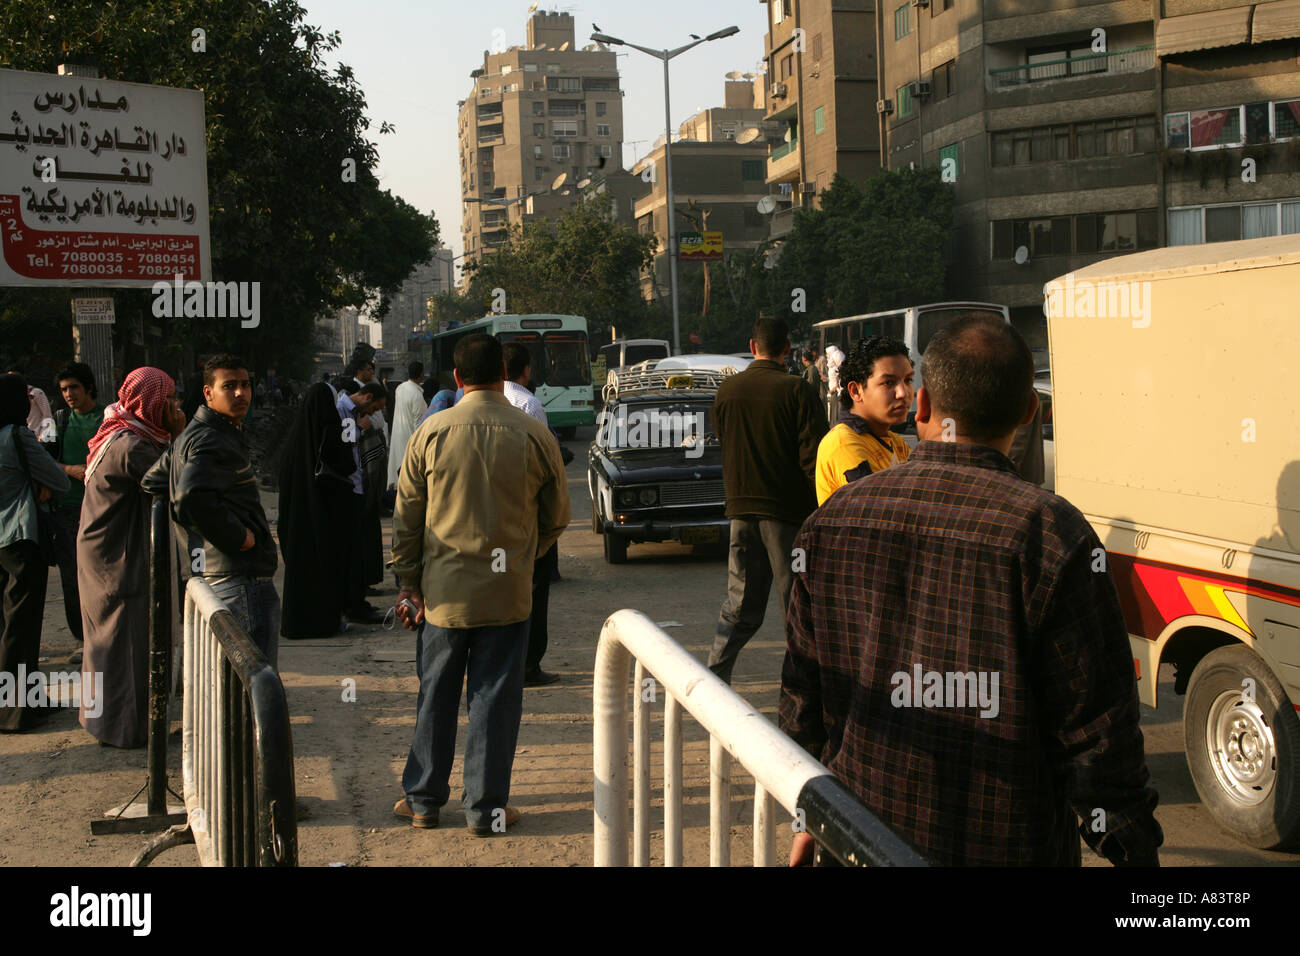 Locals on the street in Cairo, Egypt. Stock Photo